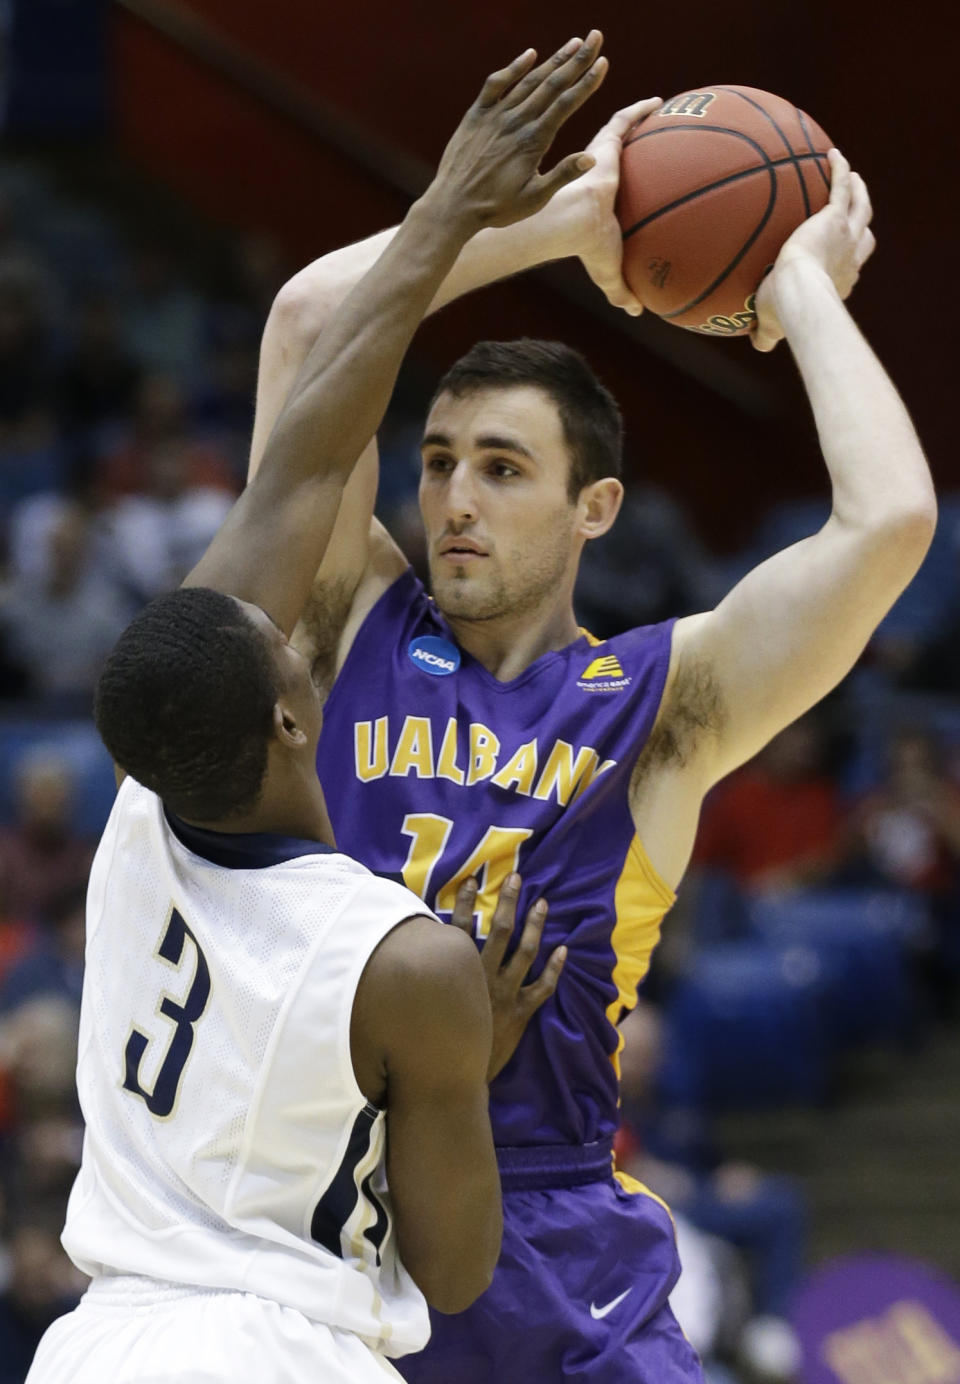 Albany forward Sam Rowley (14) is pressured by Mount St. Mary's guard Sam Prescott (3) in the first half of a first-round game of the NCAA college basketball tournament, Tuesday, March 18, 2014, in Dayton, Ohio. (AP Photo/Al Behrman)